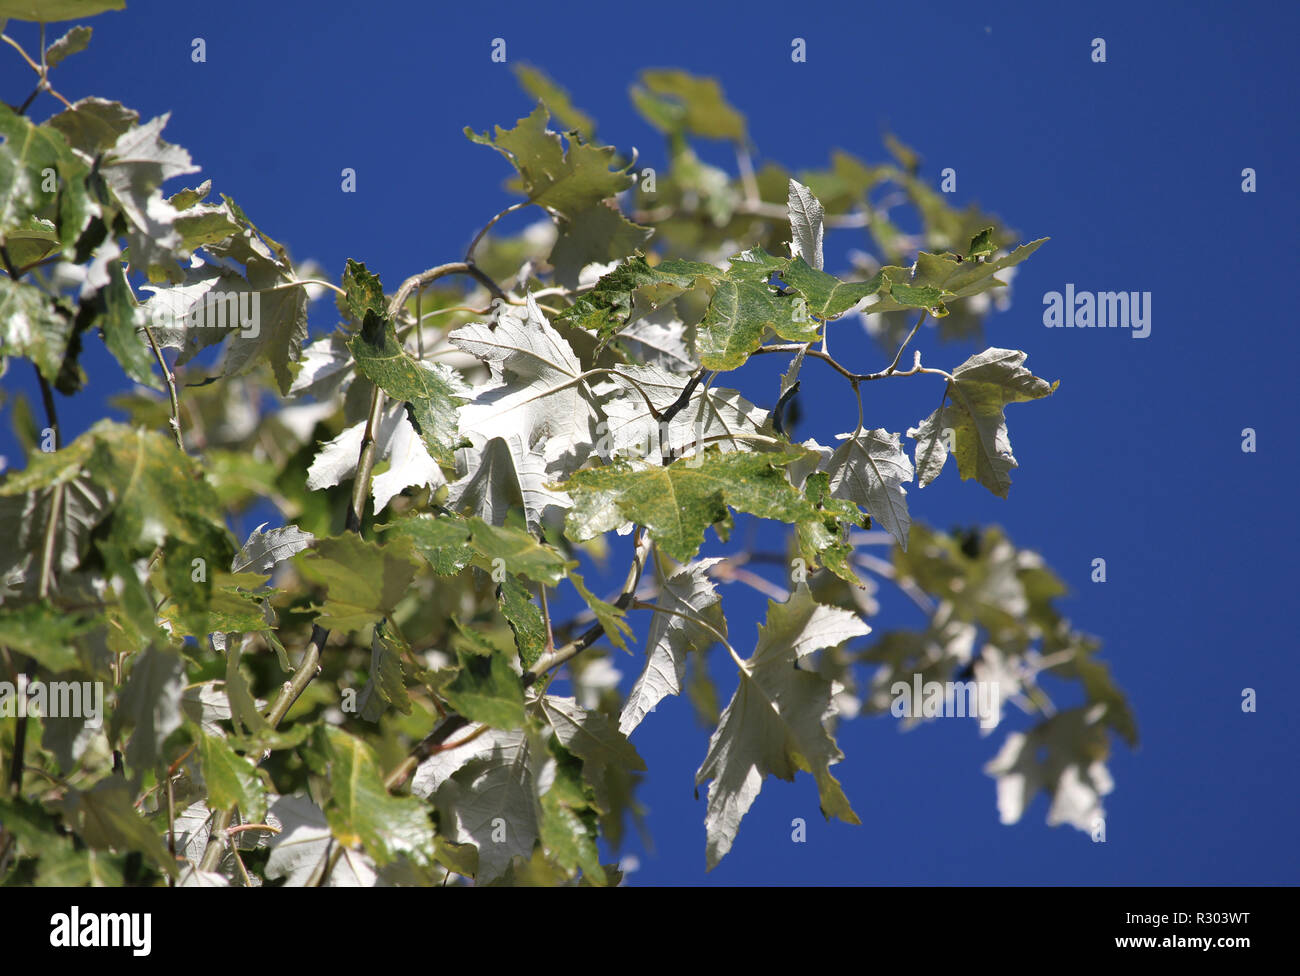 Lovely silvery white foliage of the tree Populus alba (White Polar) against a background of clear blue sky. Stock Photo